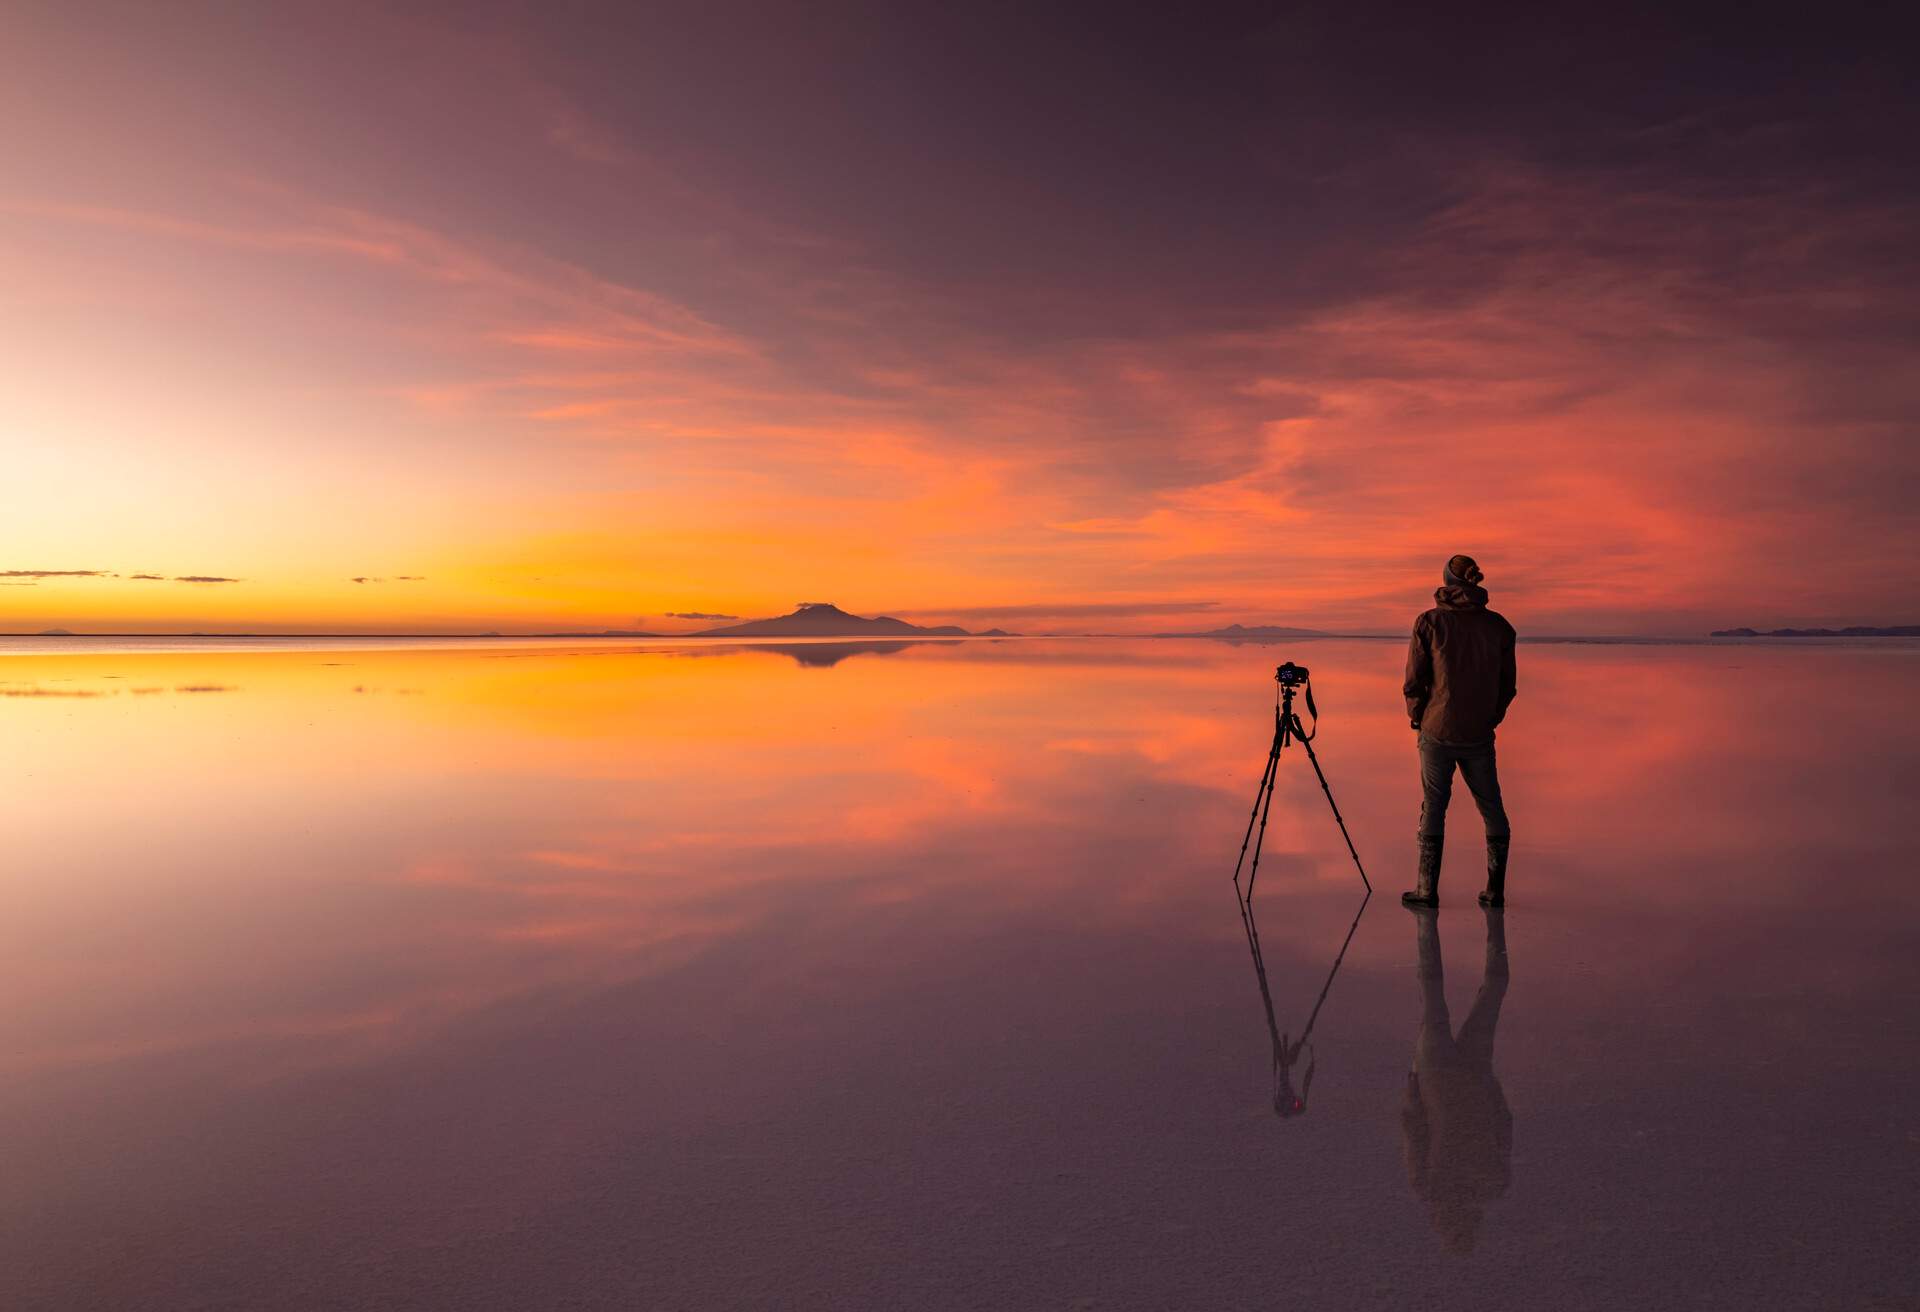 Uyuni in the rainy season is covered with a thin layer of water that reflects the sky with clouds